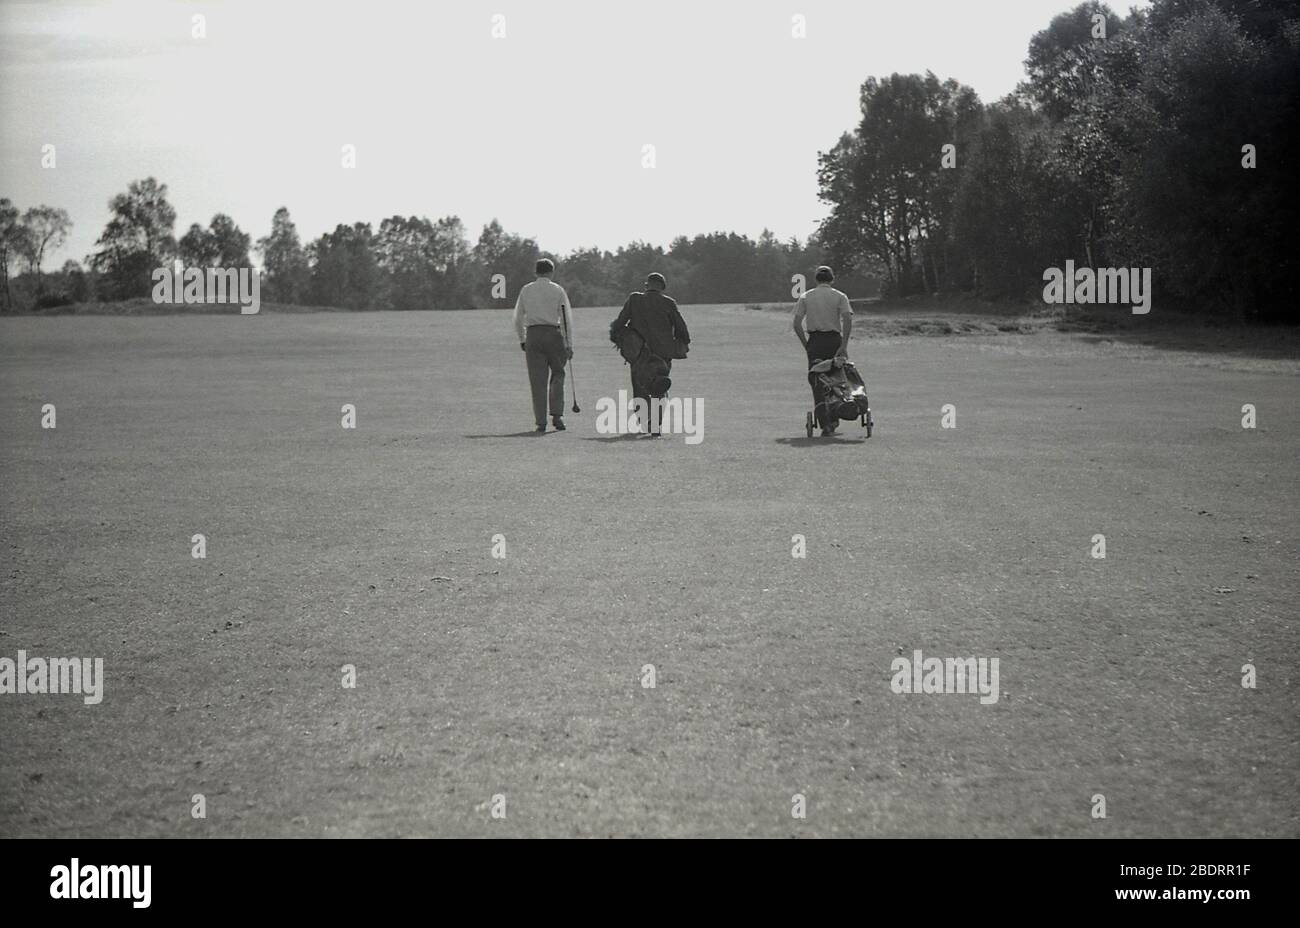 1960s, historical, on a golf course, in a line, three men walking down a fairway, two golfers and a caddie who is carrying clubs for one of them  and who is wearing a suit, while the other golfer is pulling a golf bag on a trolley of the era. Stock Photo